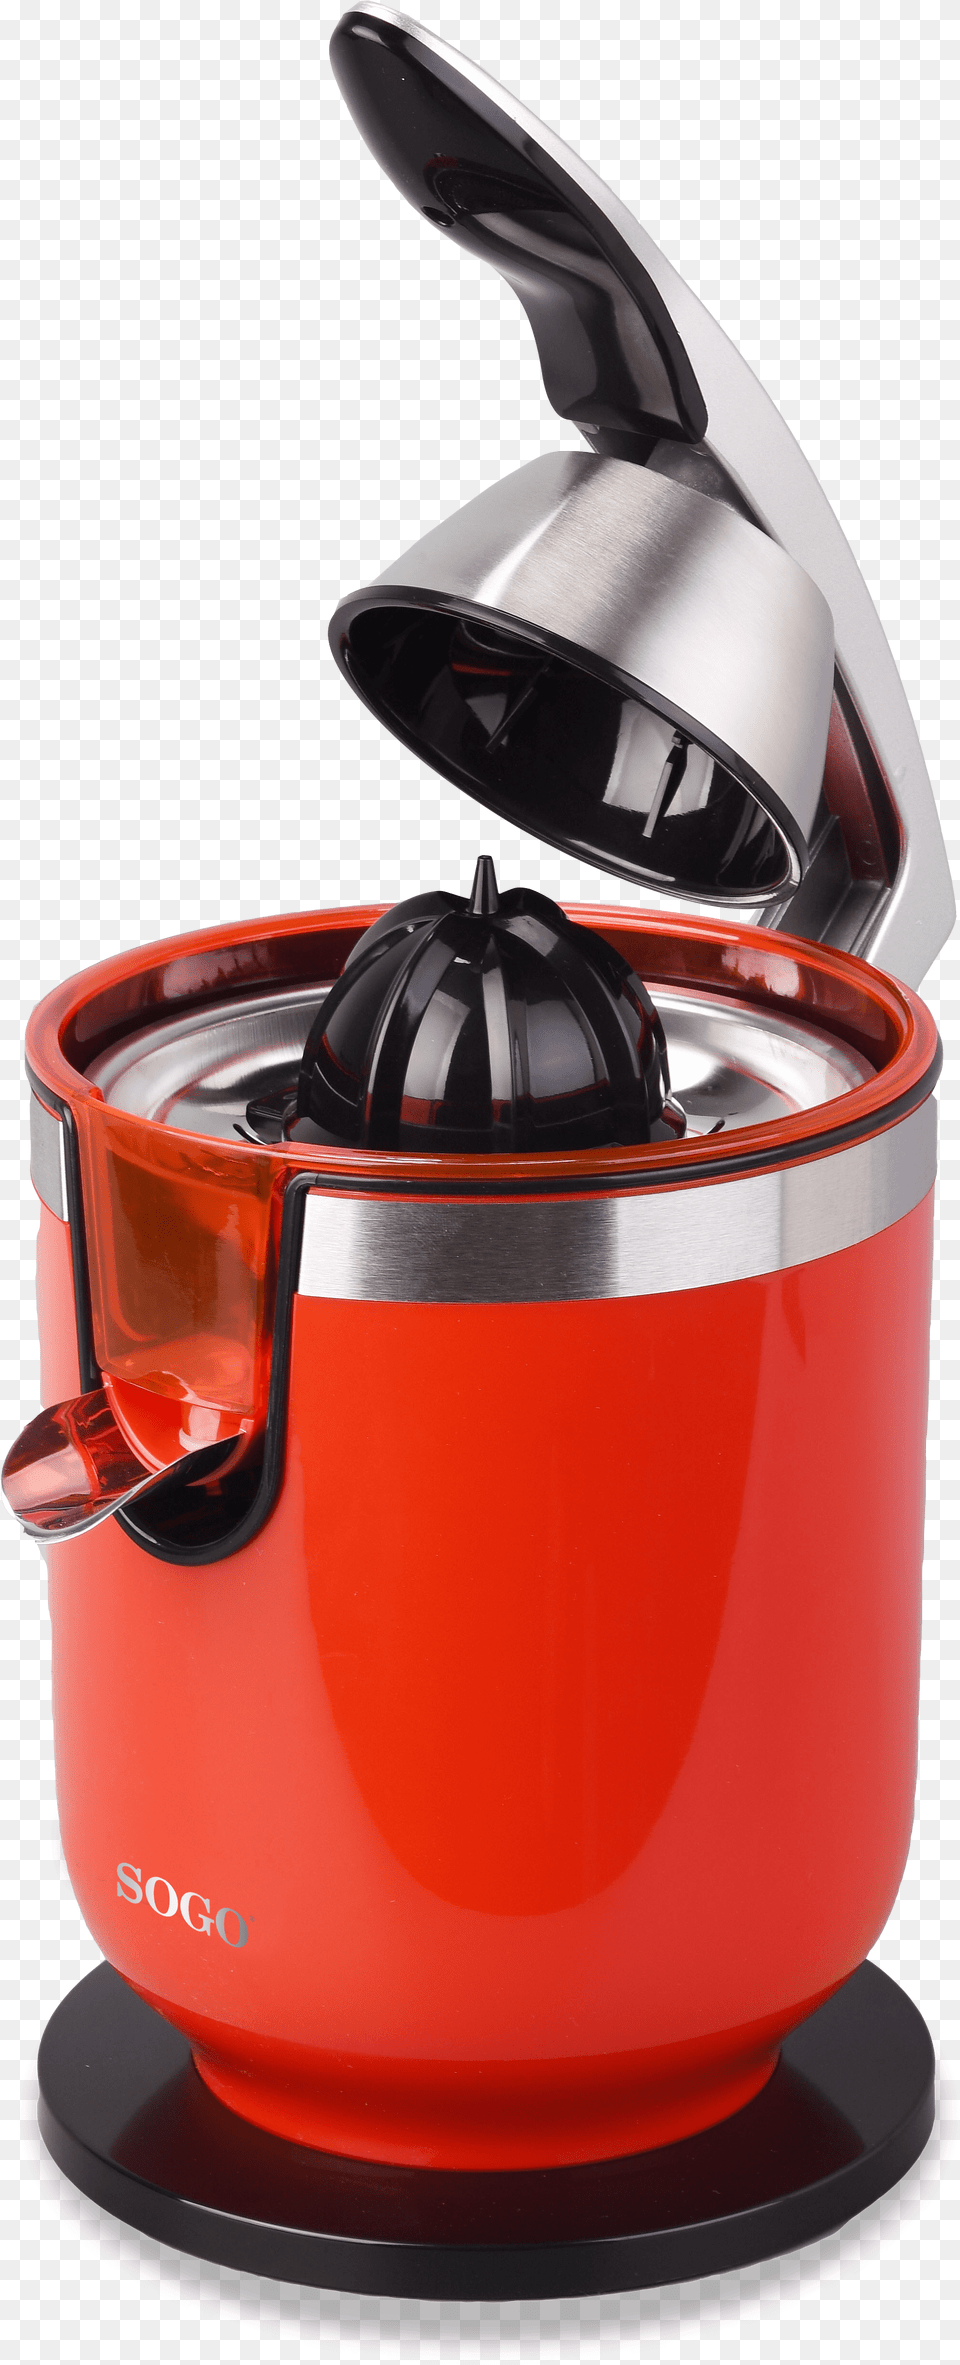 Mixer, Appliance, Cooker, Device, Electrical Device Png Image